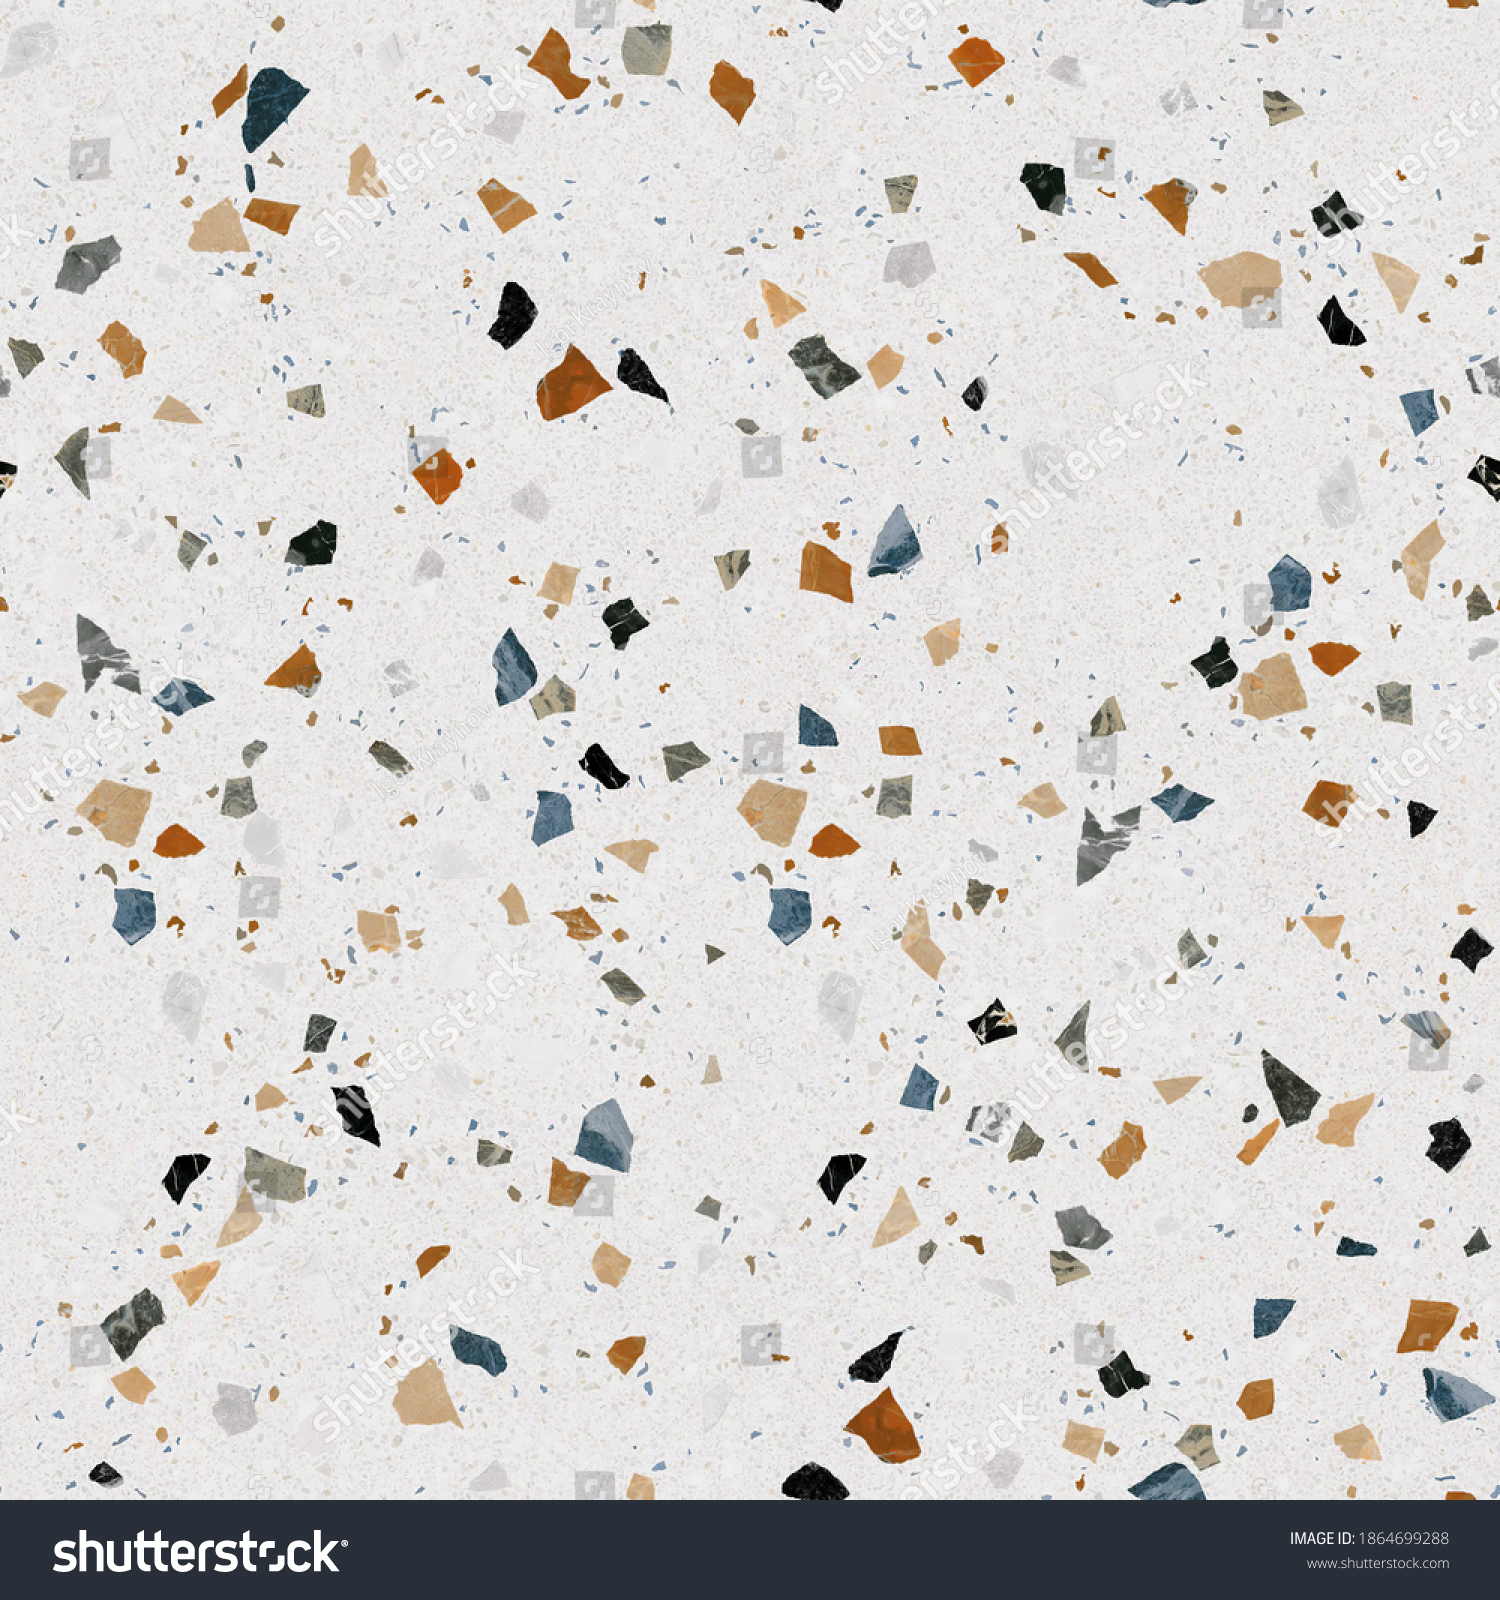 Terrazzo marble flooring seamless texture. Natural stones, granite, marble, quartz, limestone, concrete. Beige background with colored chips. #1864699288